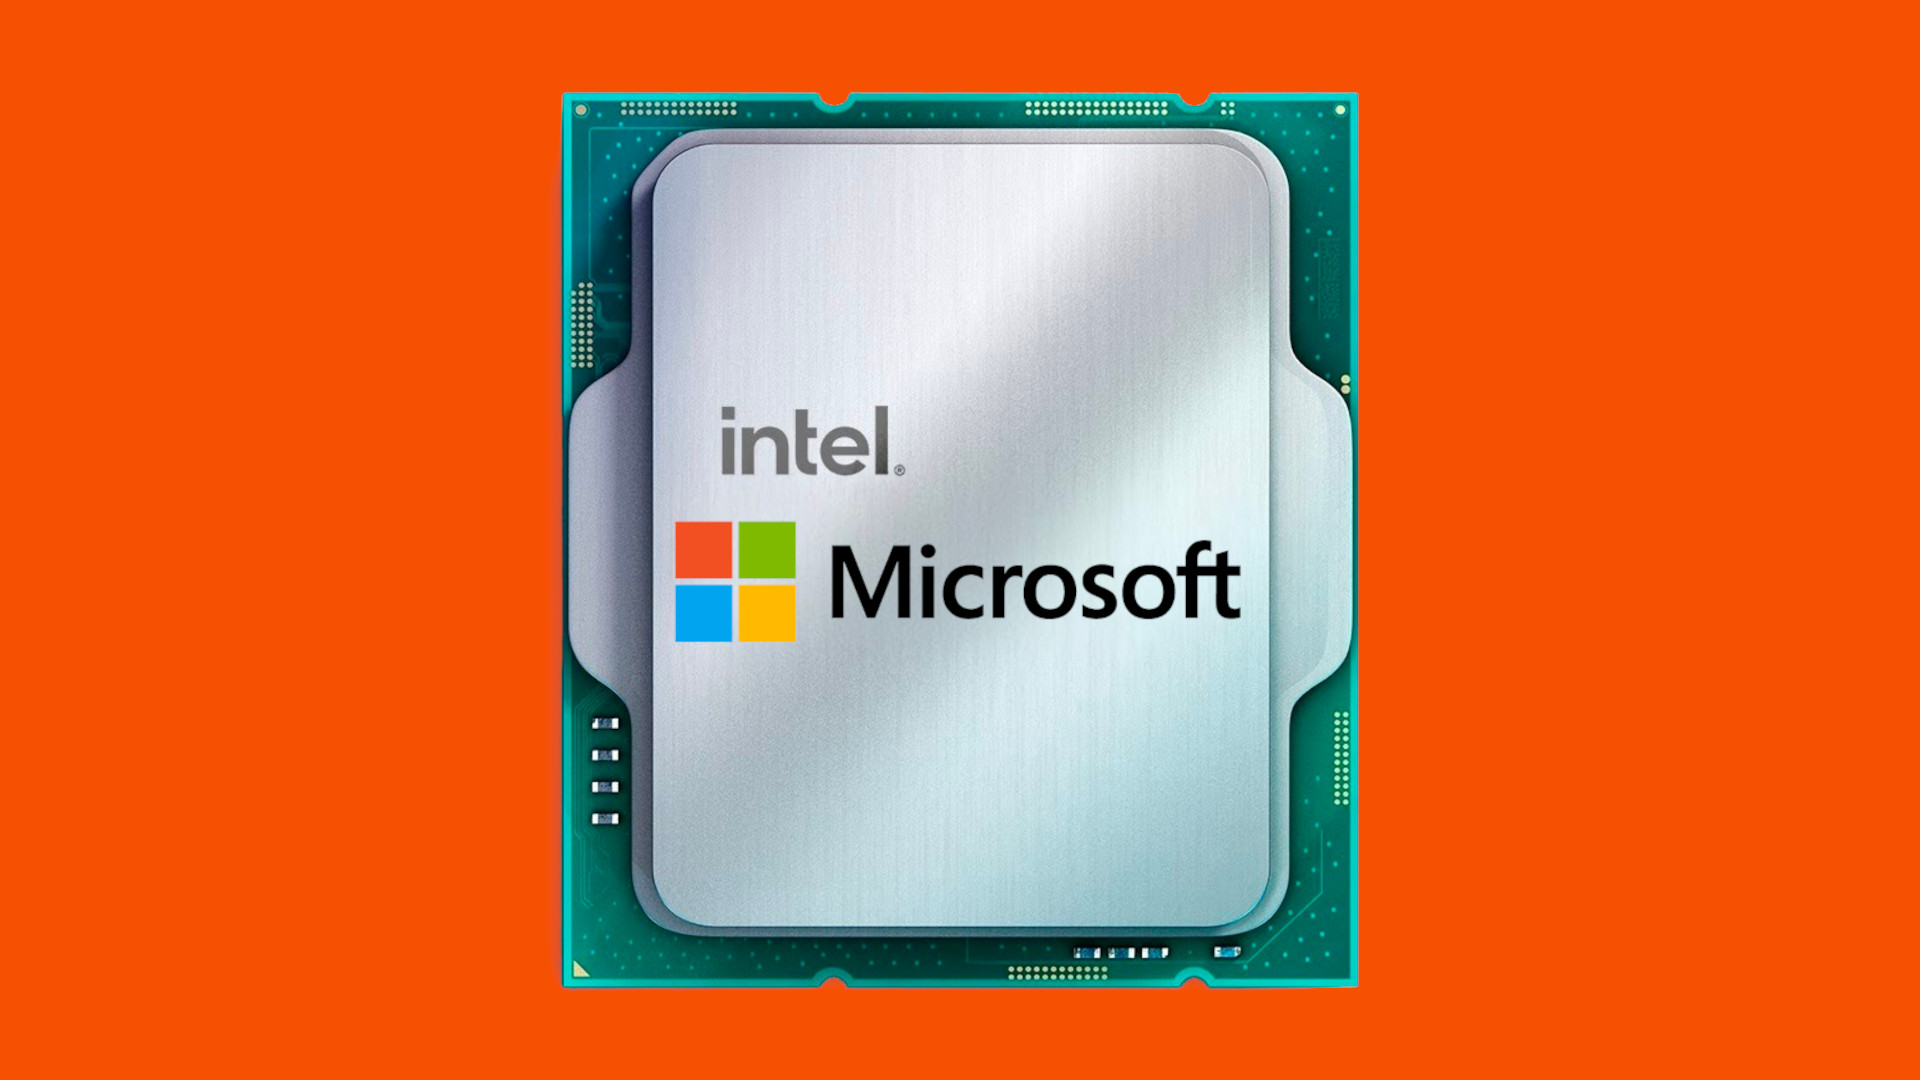 Microsoft CPUs are coming and they will be made by Intel